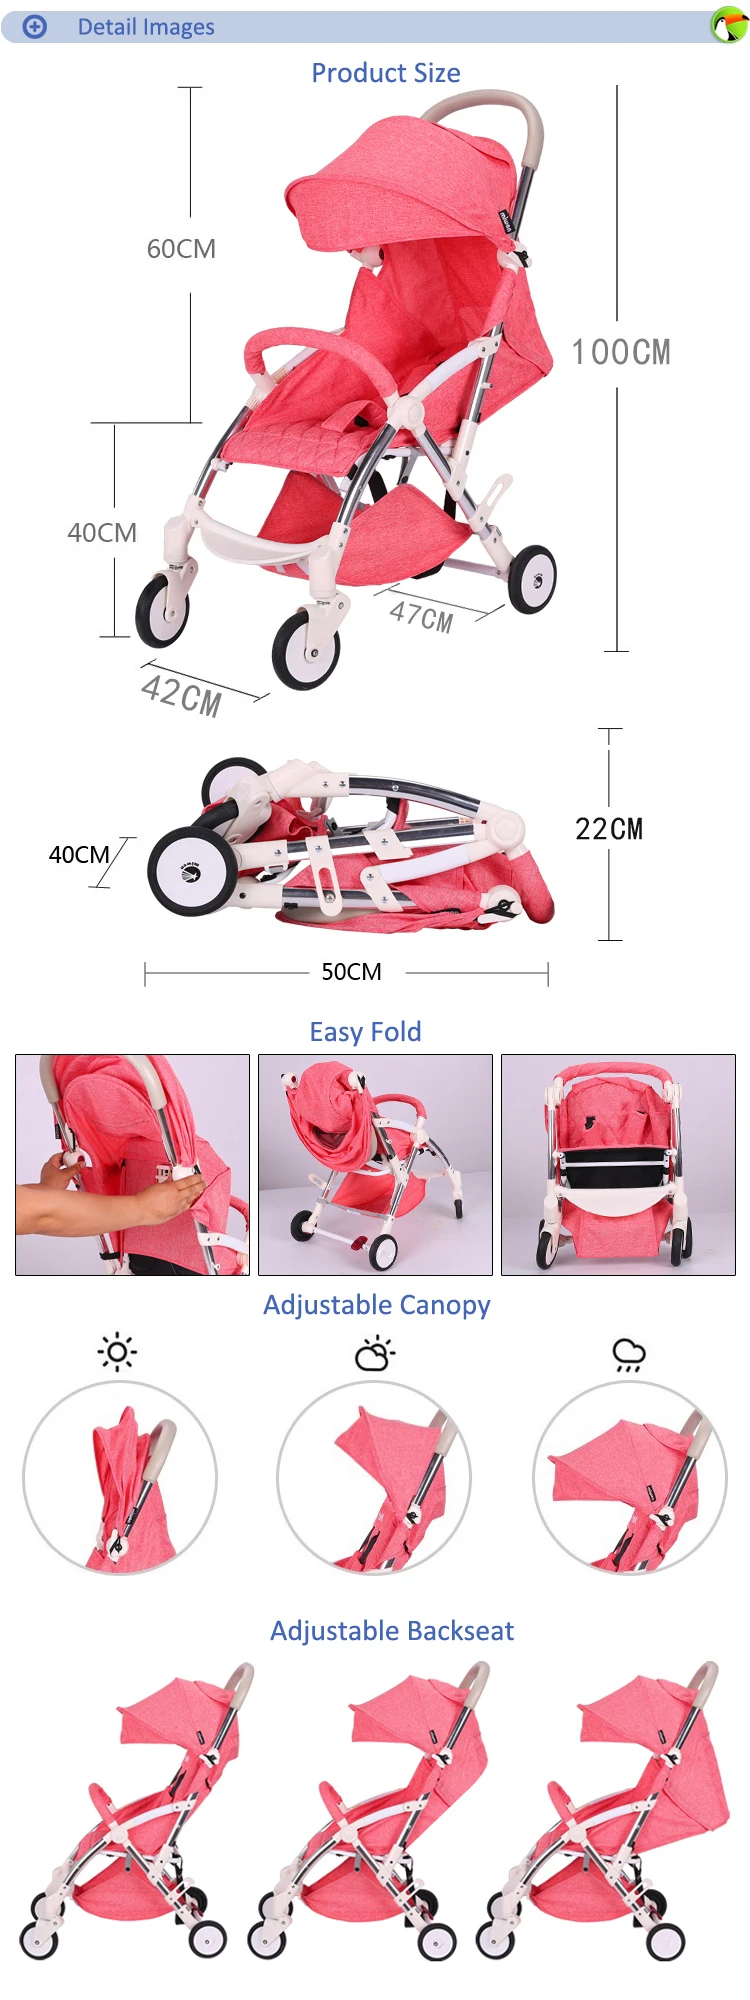 strollers for sale online